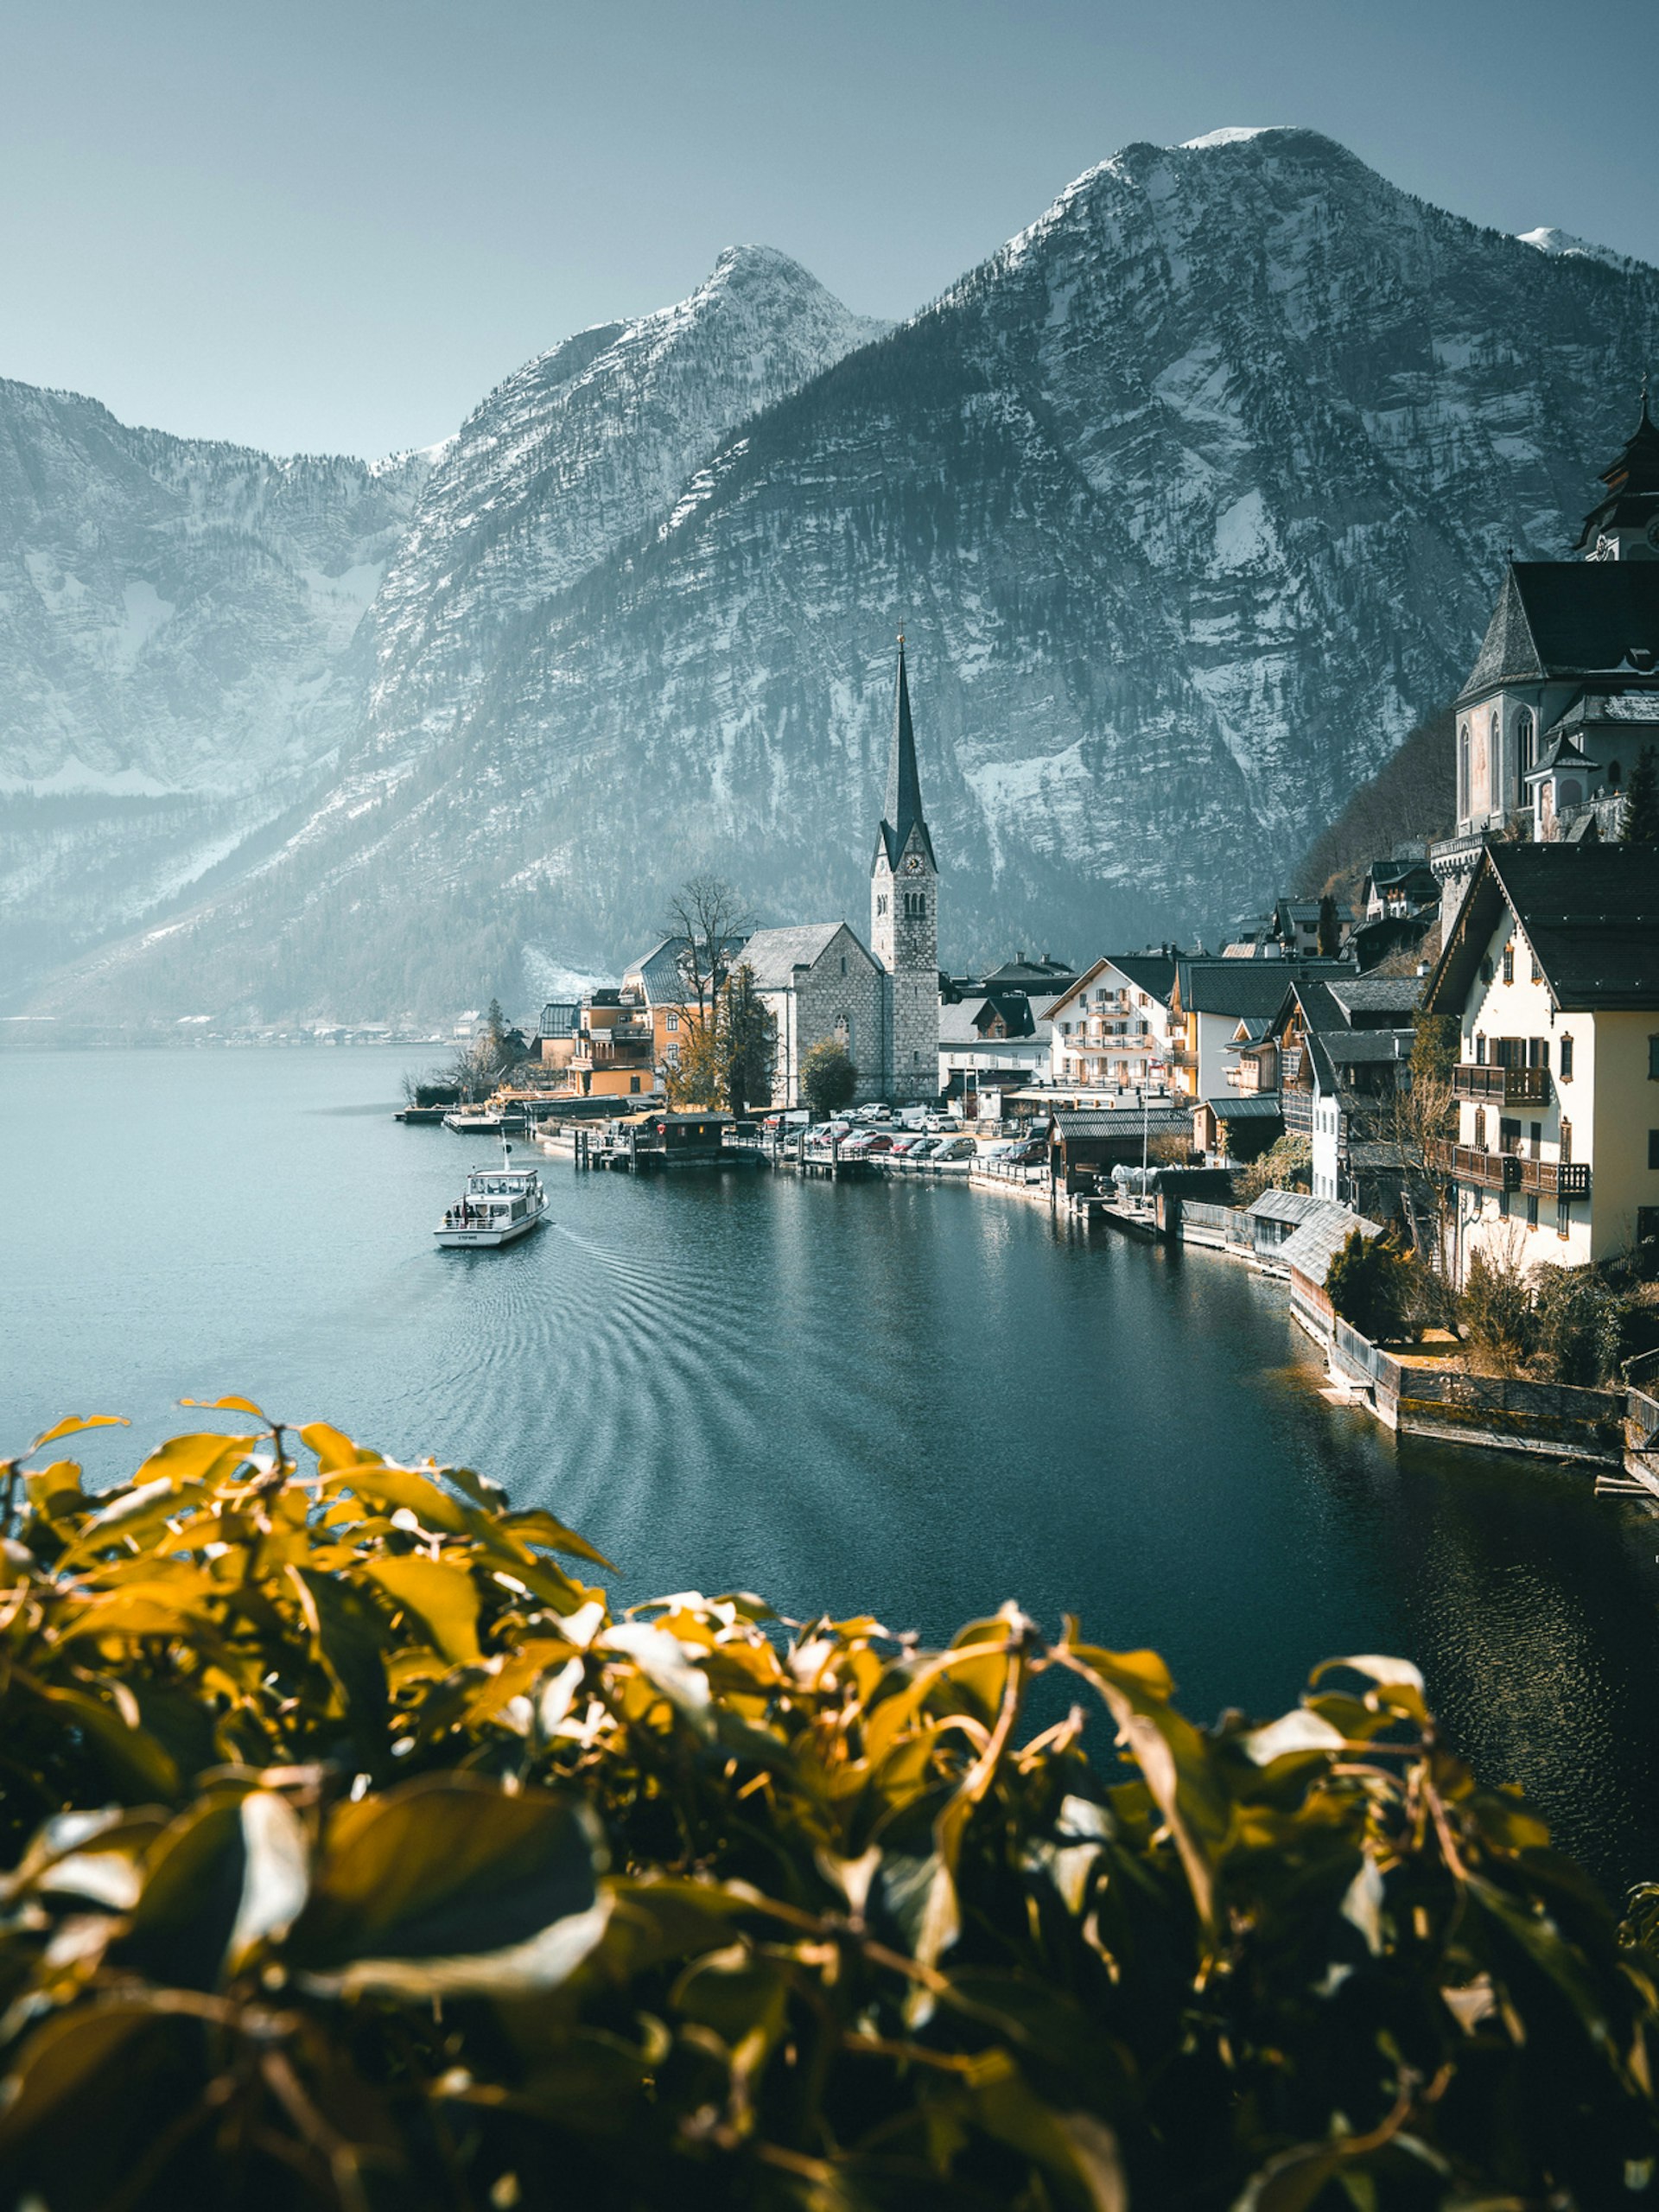 Hallstatt in Austria in winter; a picturesque town sits on the edge of a lake; there is a church with a spire and a boat sailing across the lake towards it. In the foreground is a yellow-tinged bush and in the background, dramatic snow-covered mountains.